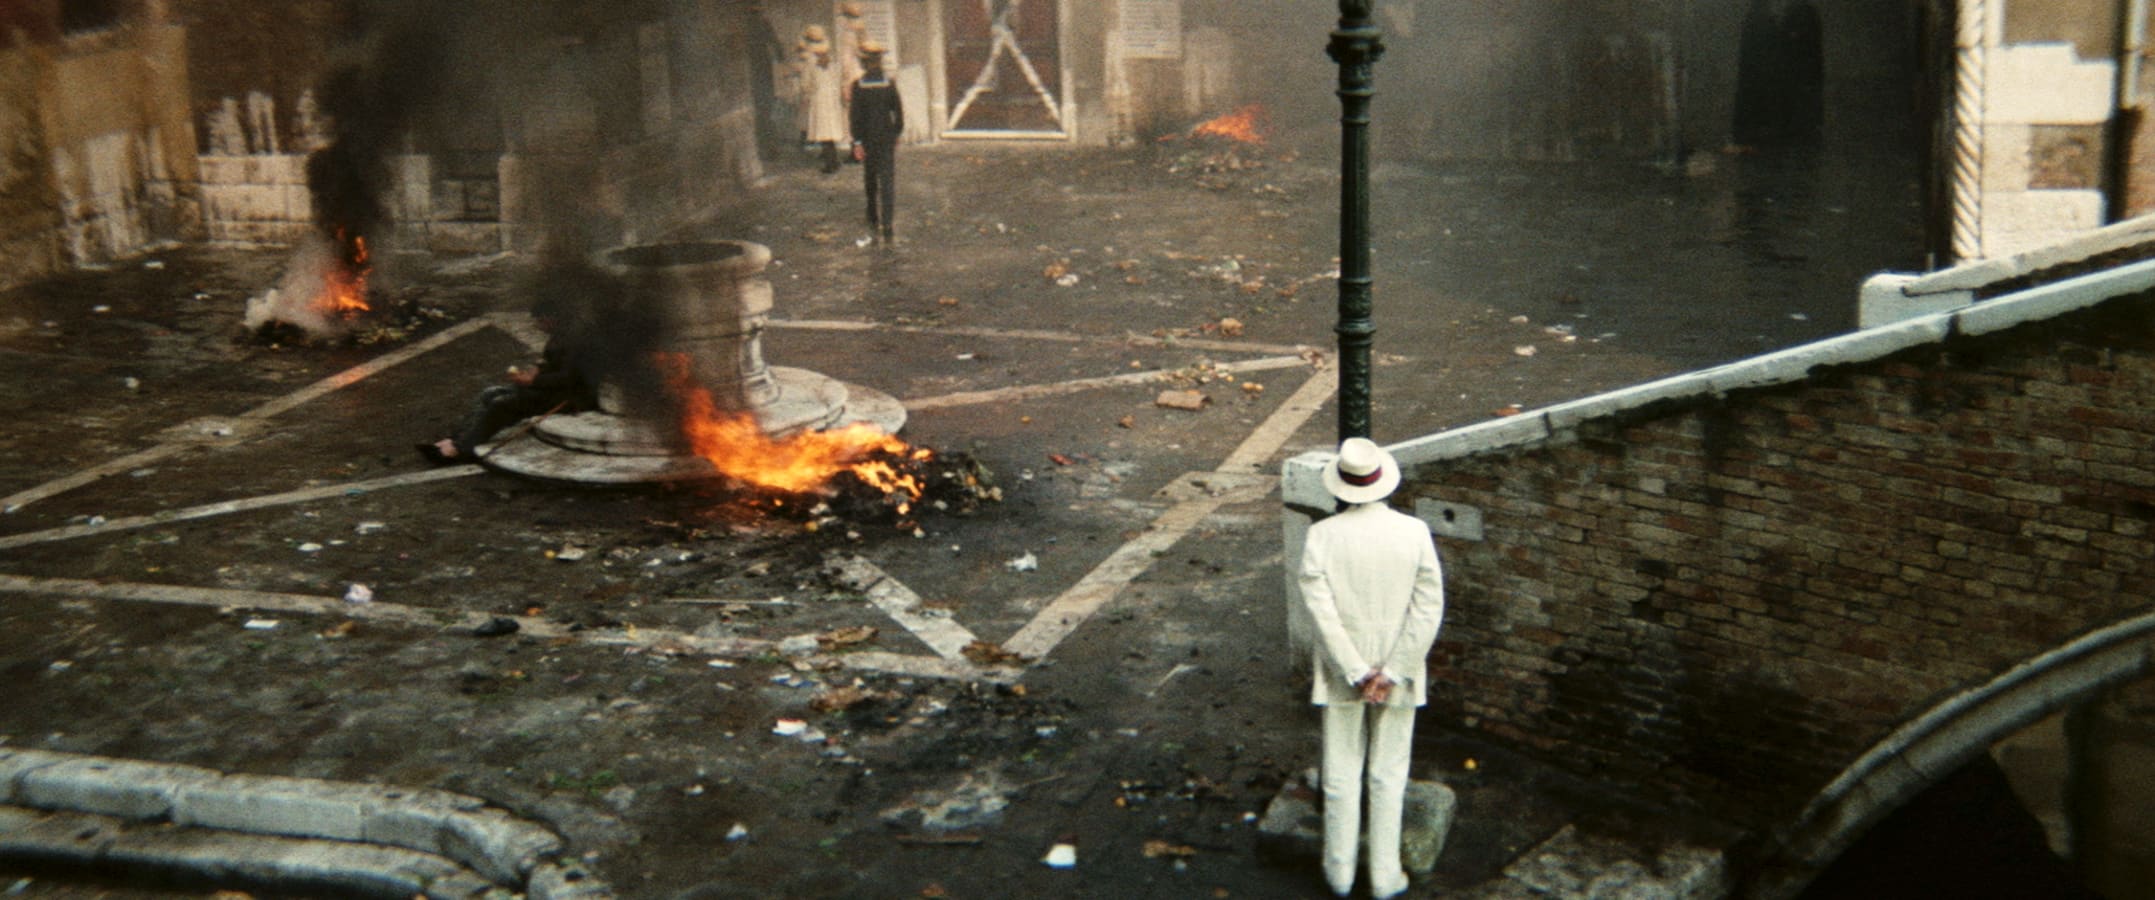 A striking still of fires in Venice from the 1971 film Death in Venice